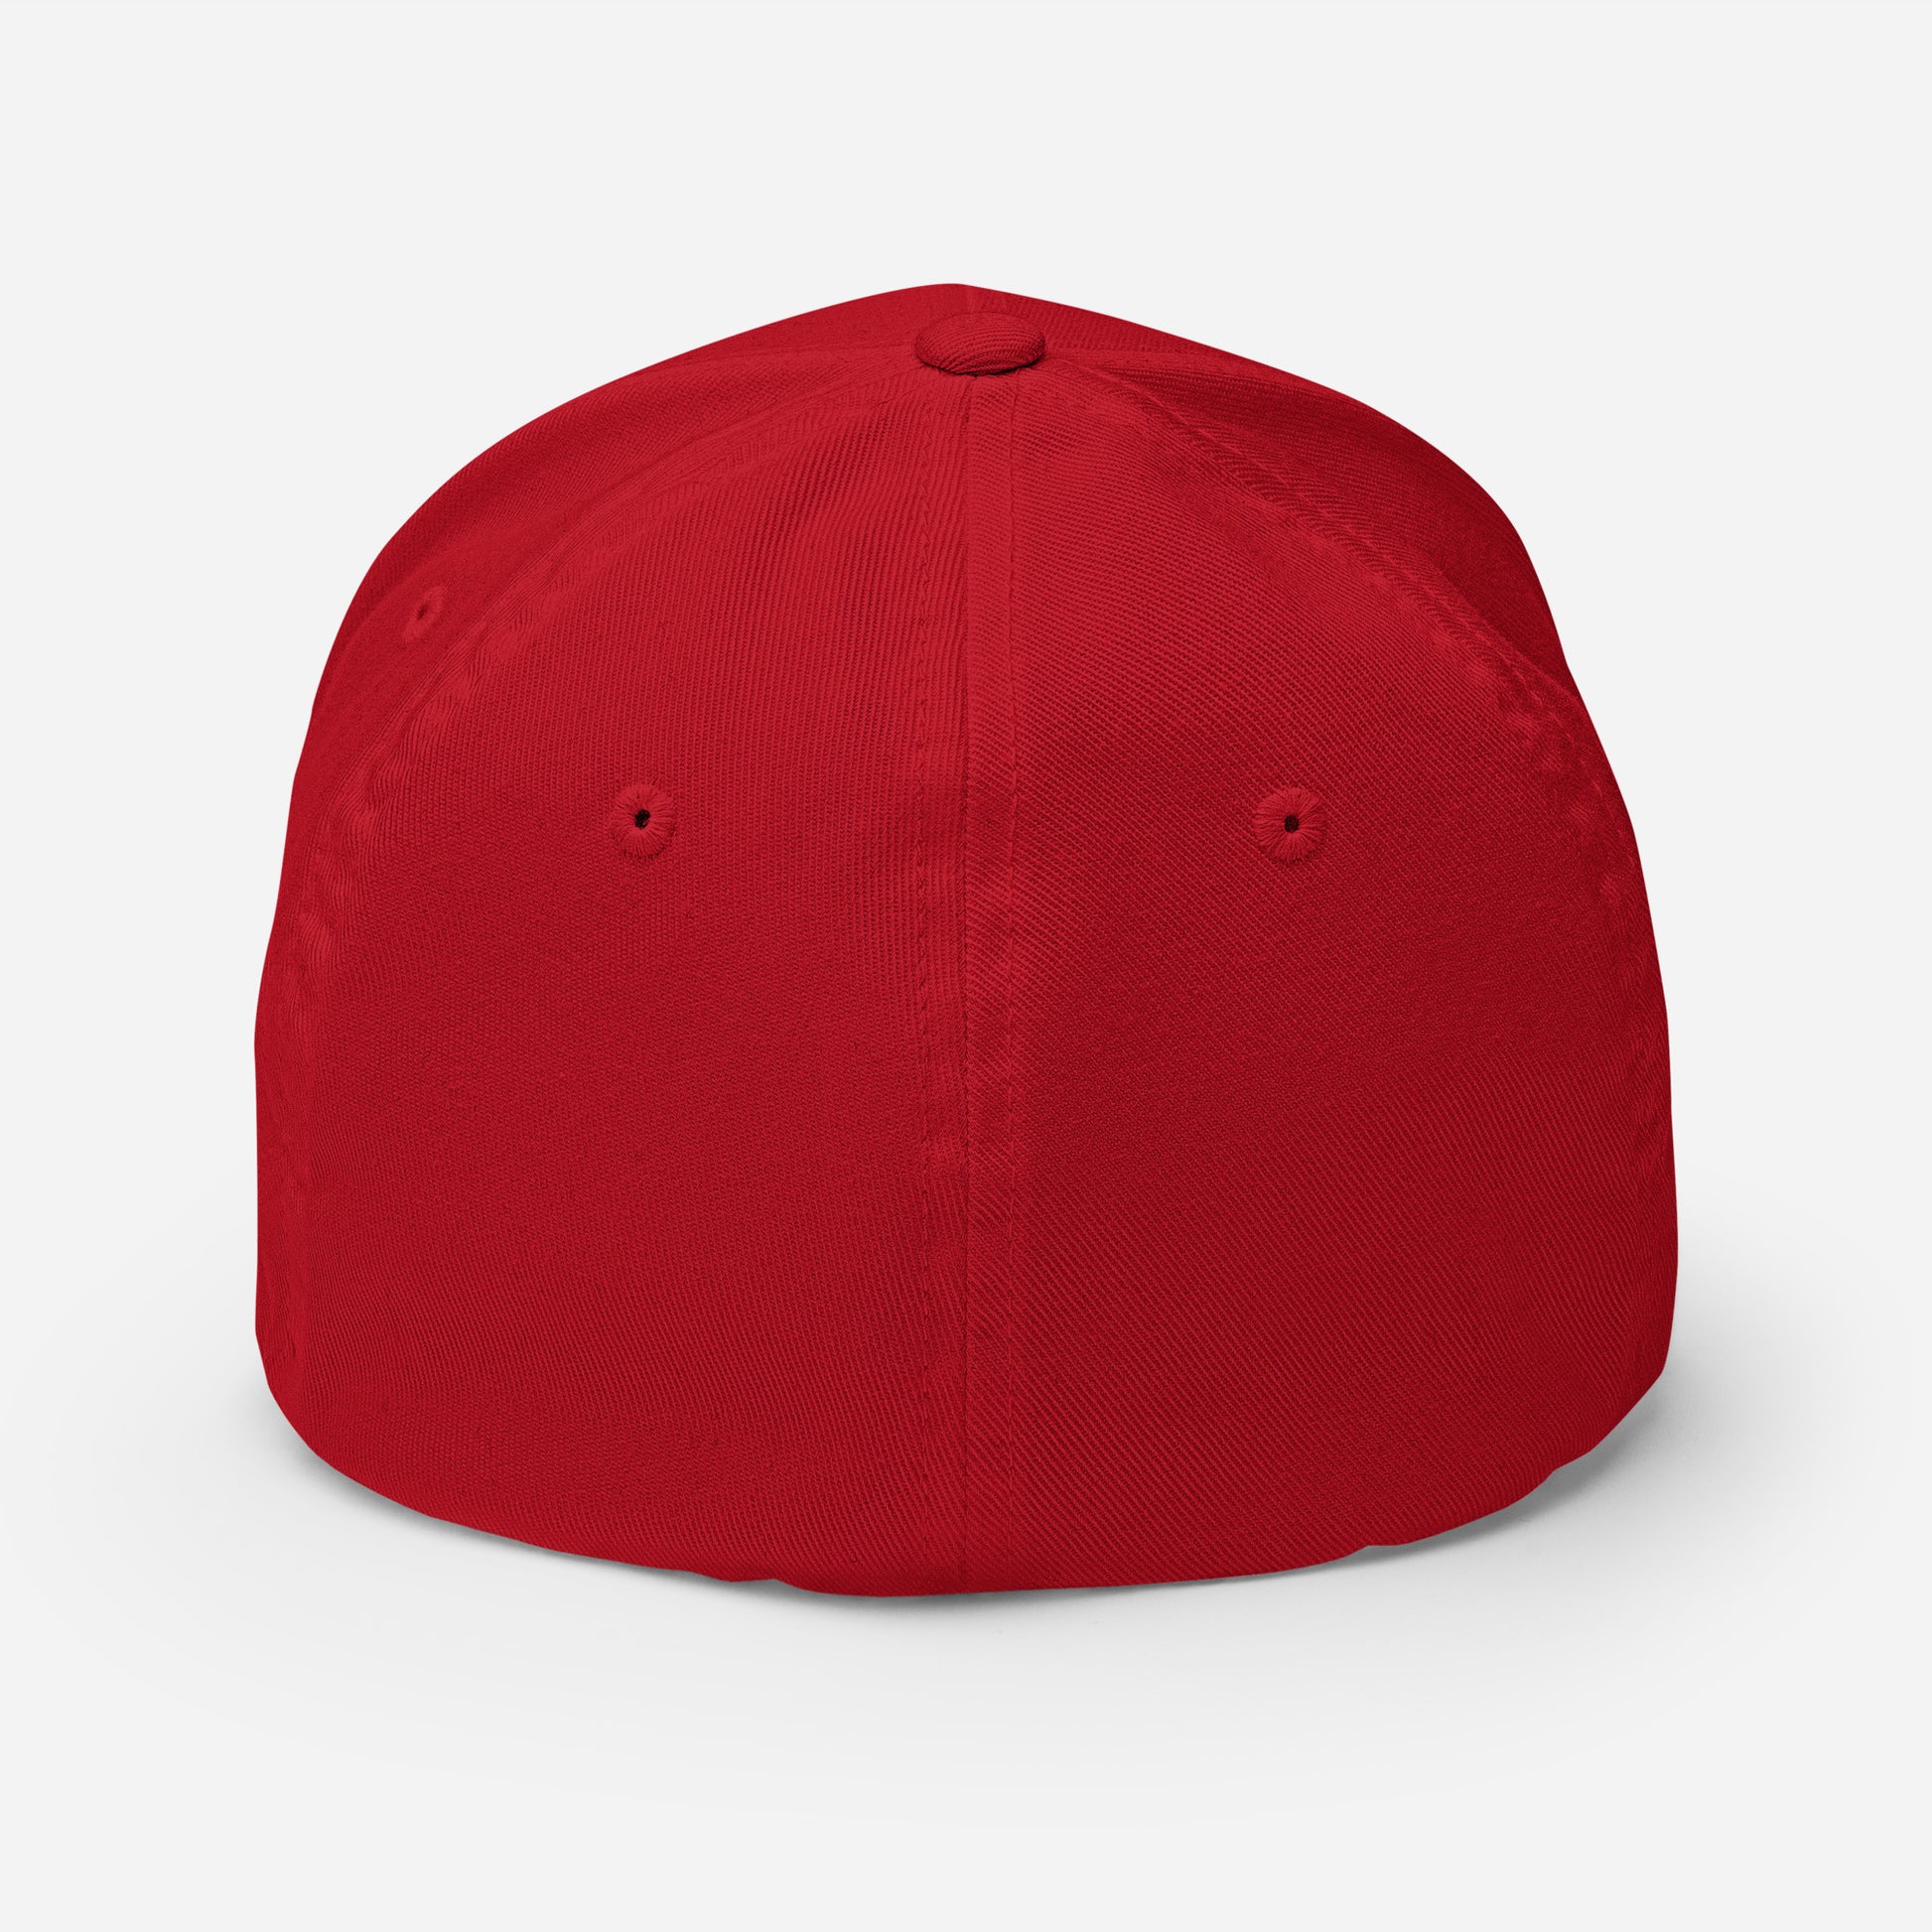 cap-from-the-back-with-polish-flag